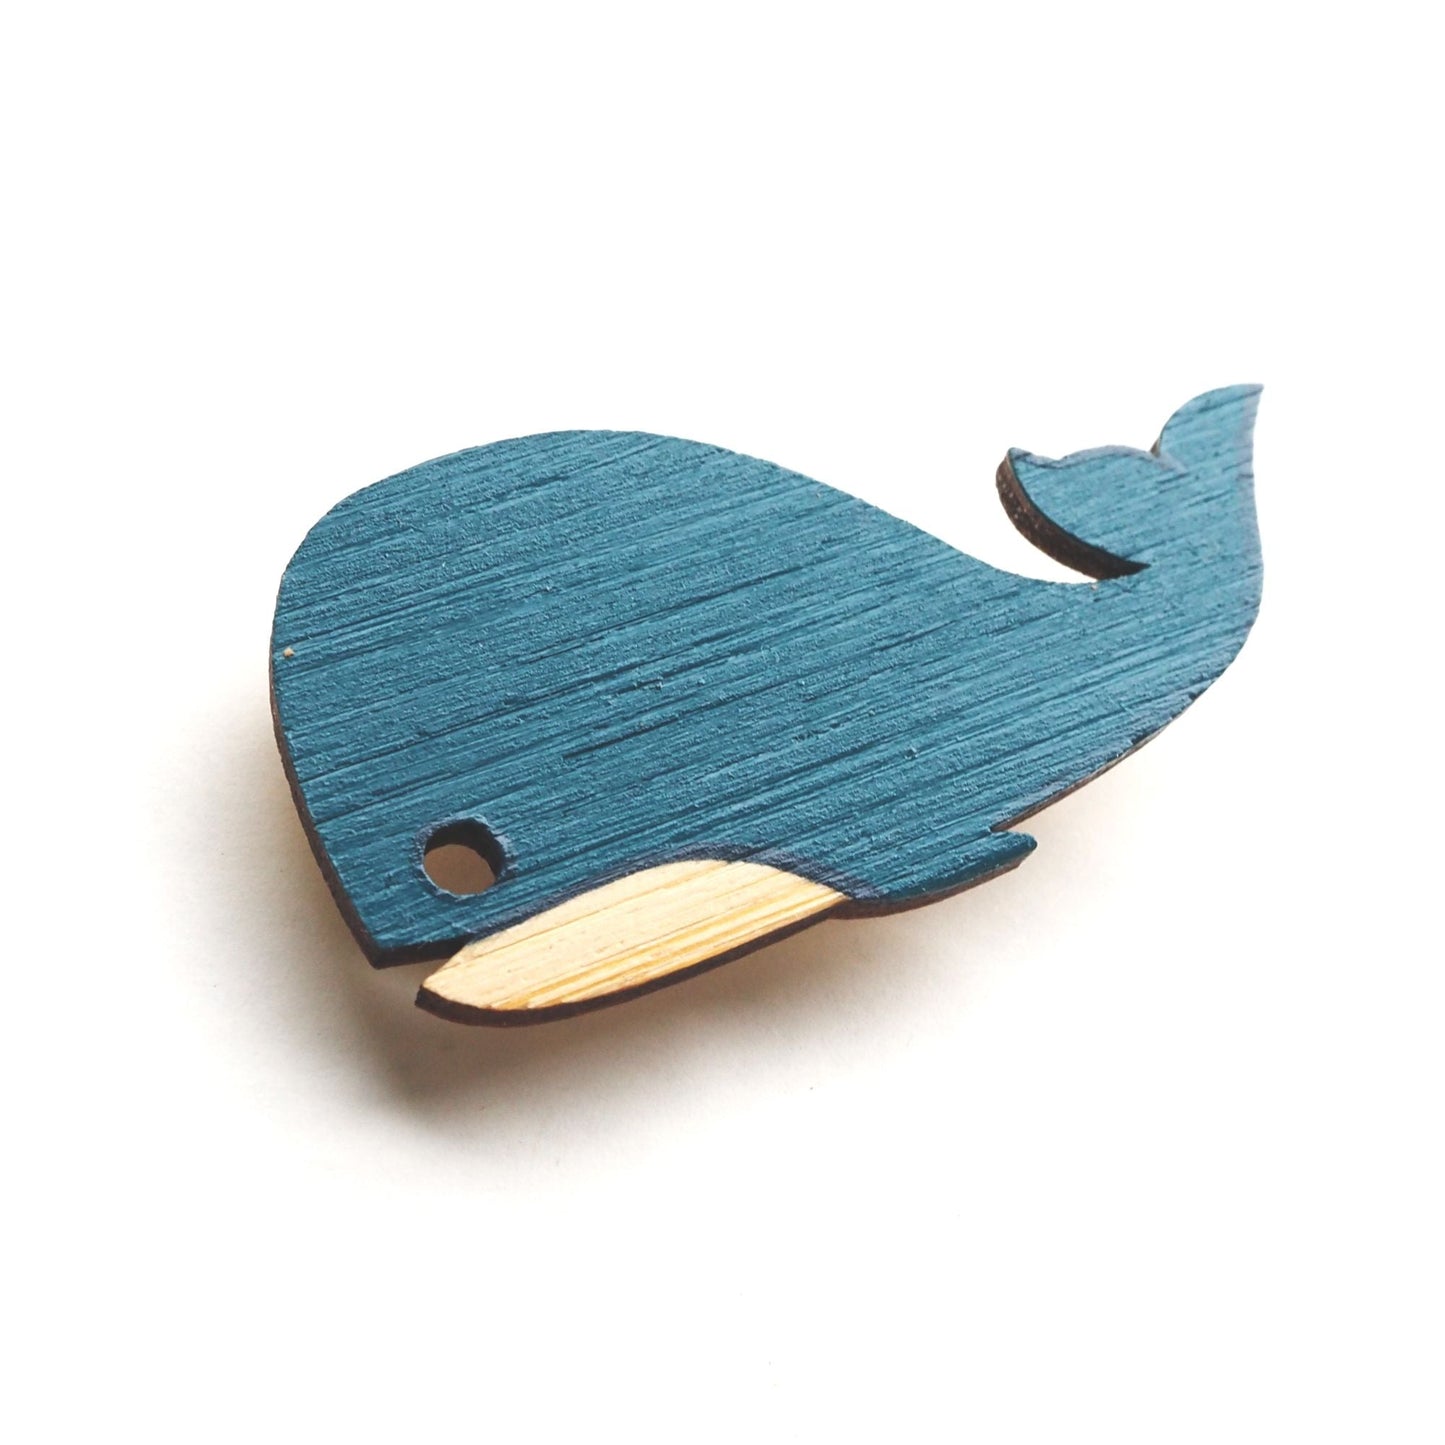 Whale brooch on a white background.